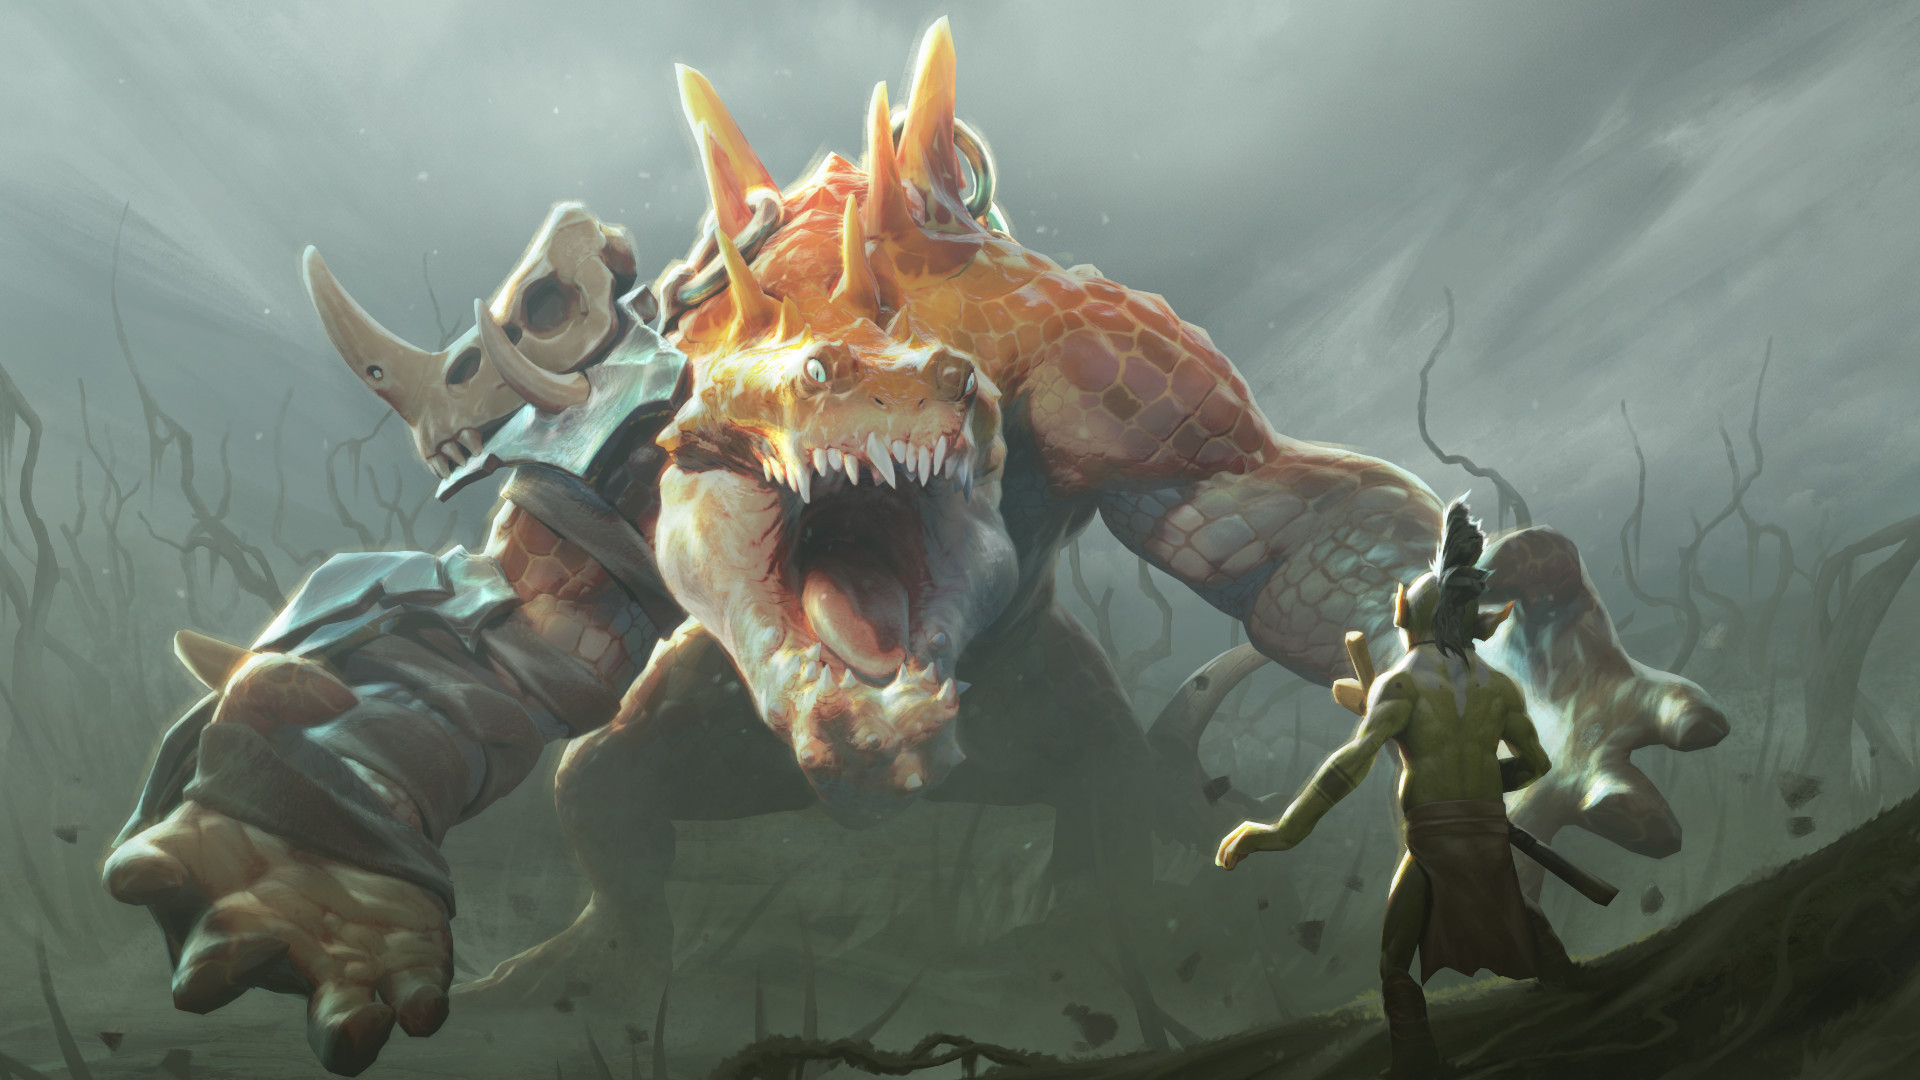 Primal Beast is the new Dota 2 hero – here are his abilities